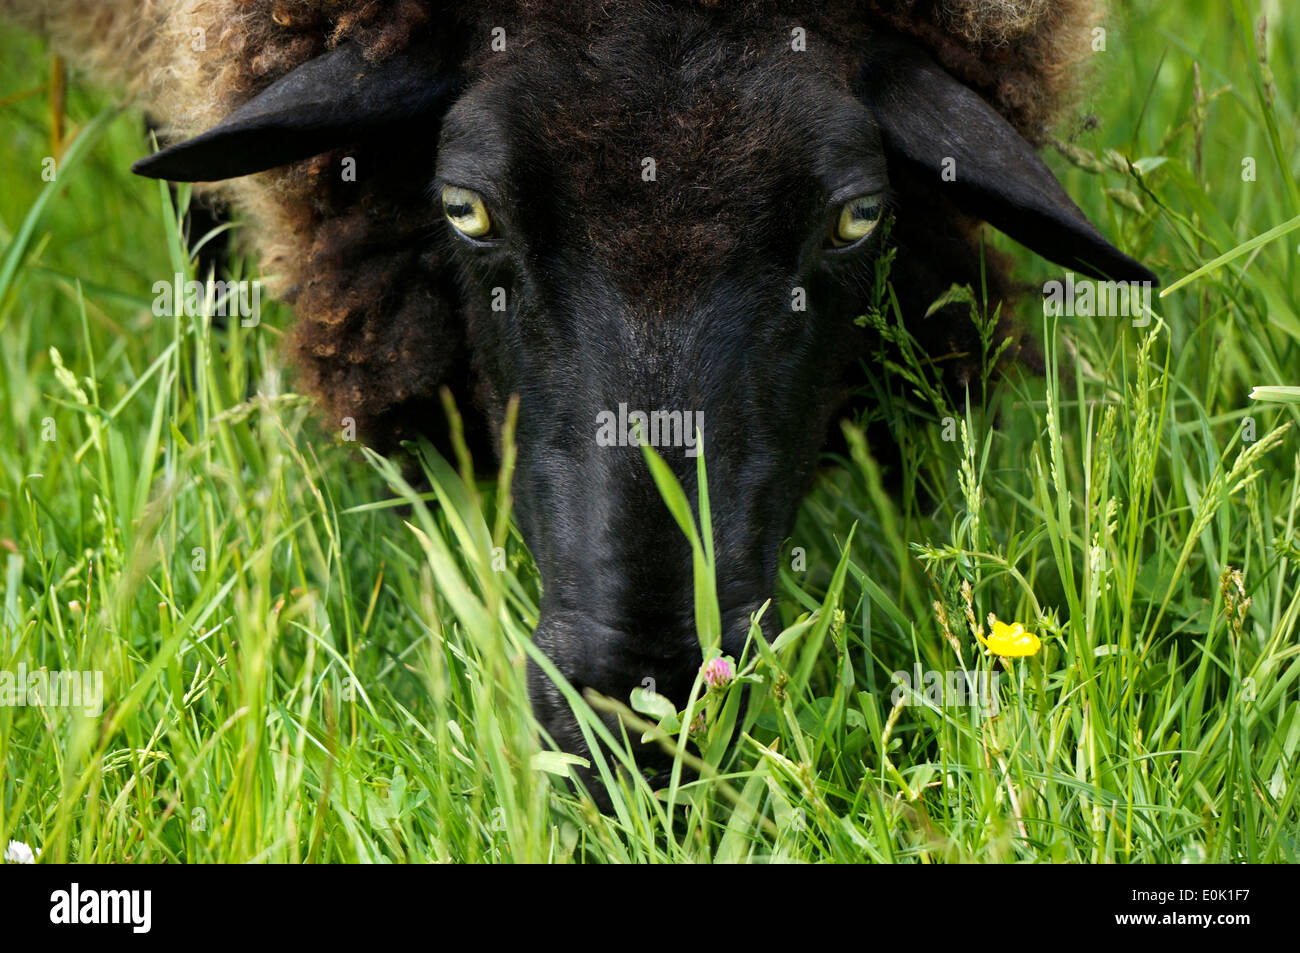 A black sheep with green eyes grazing Stock Photo